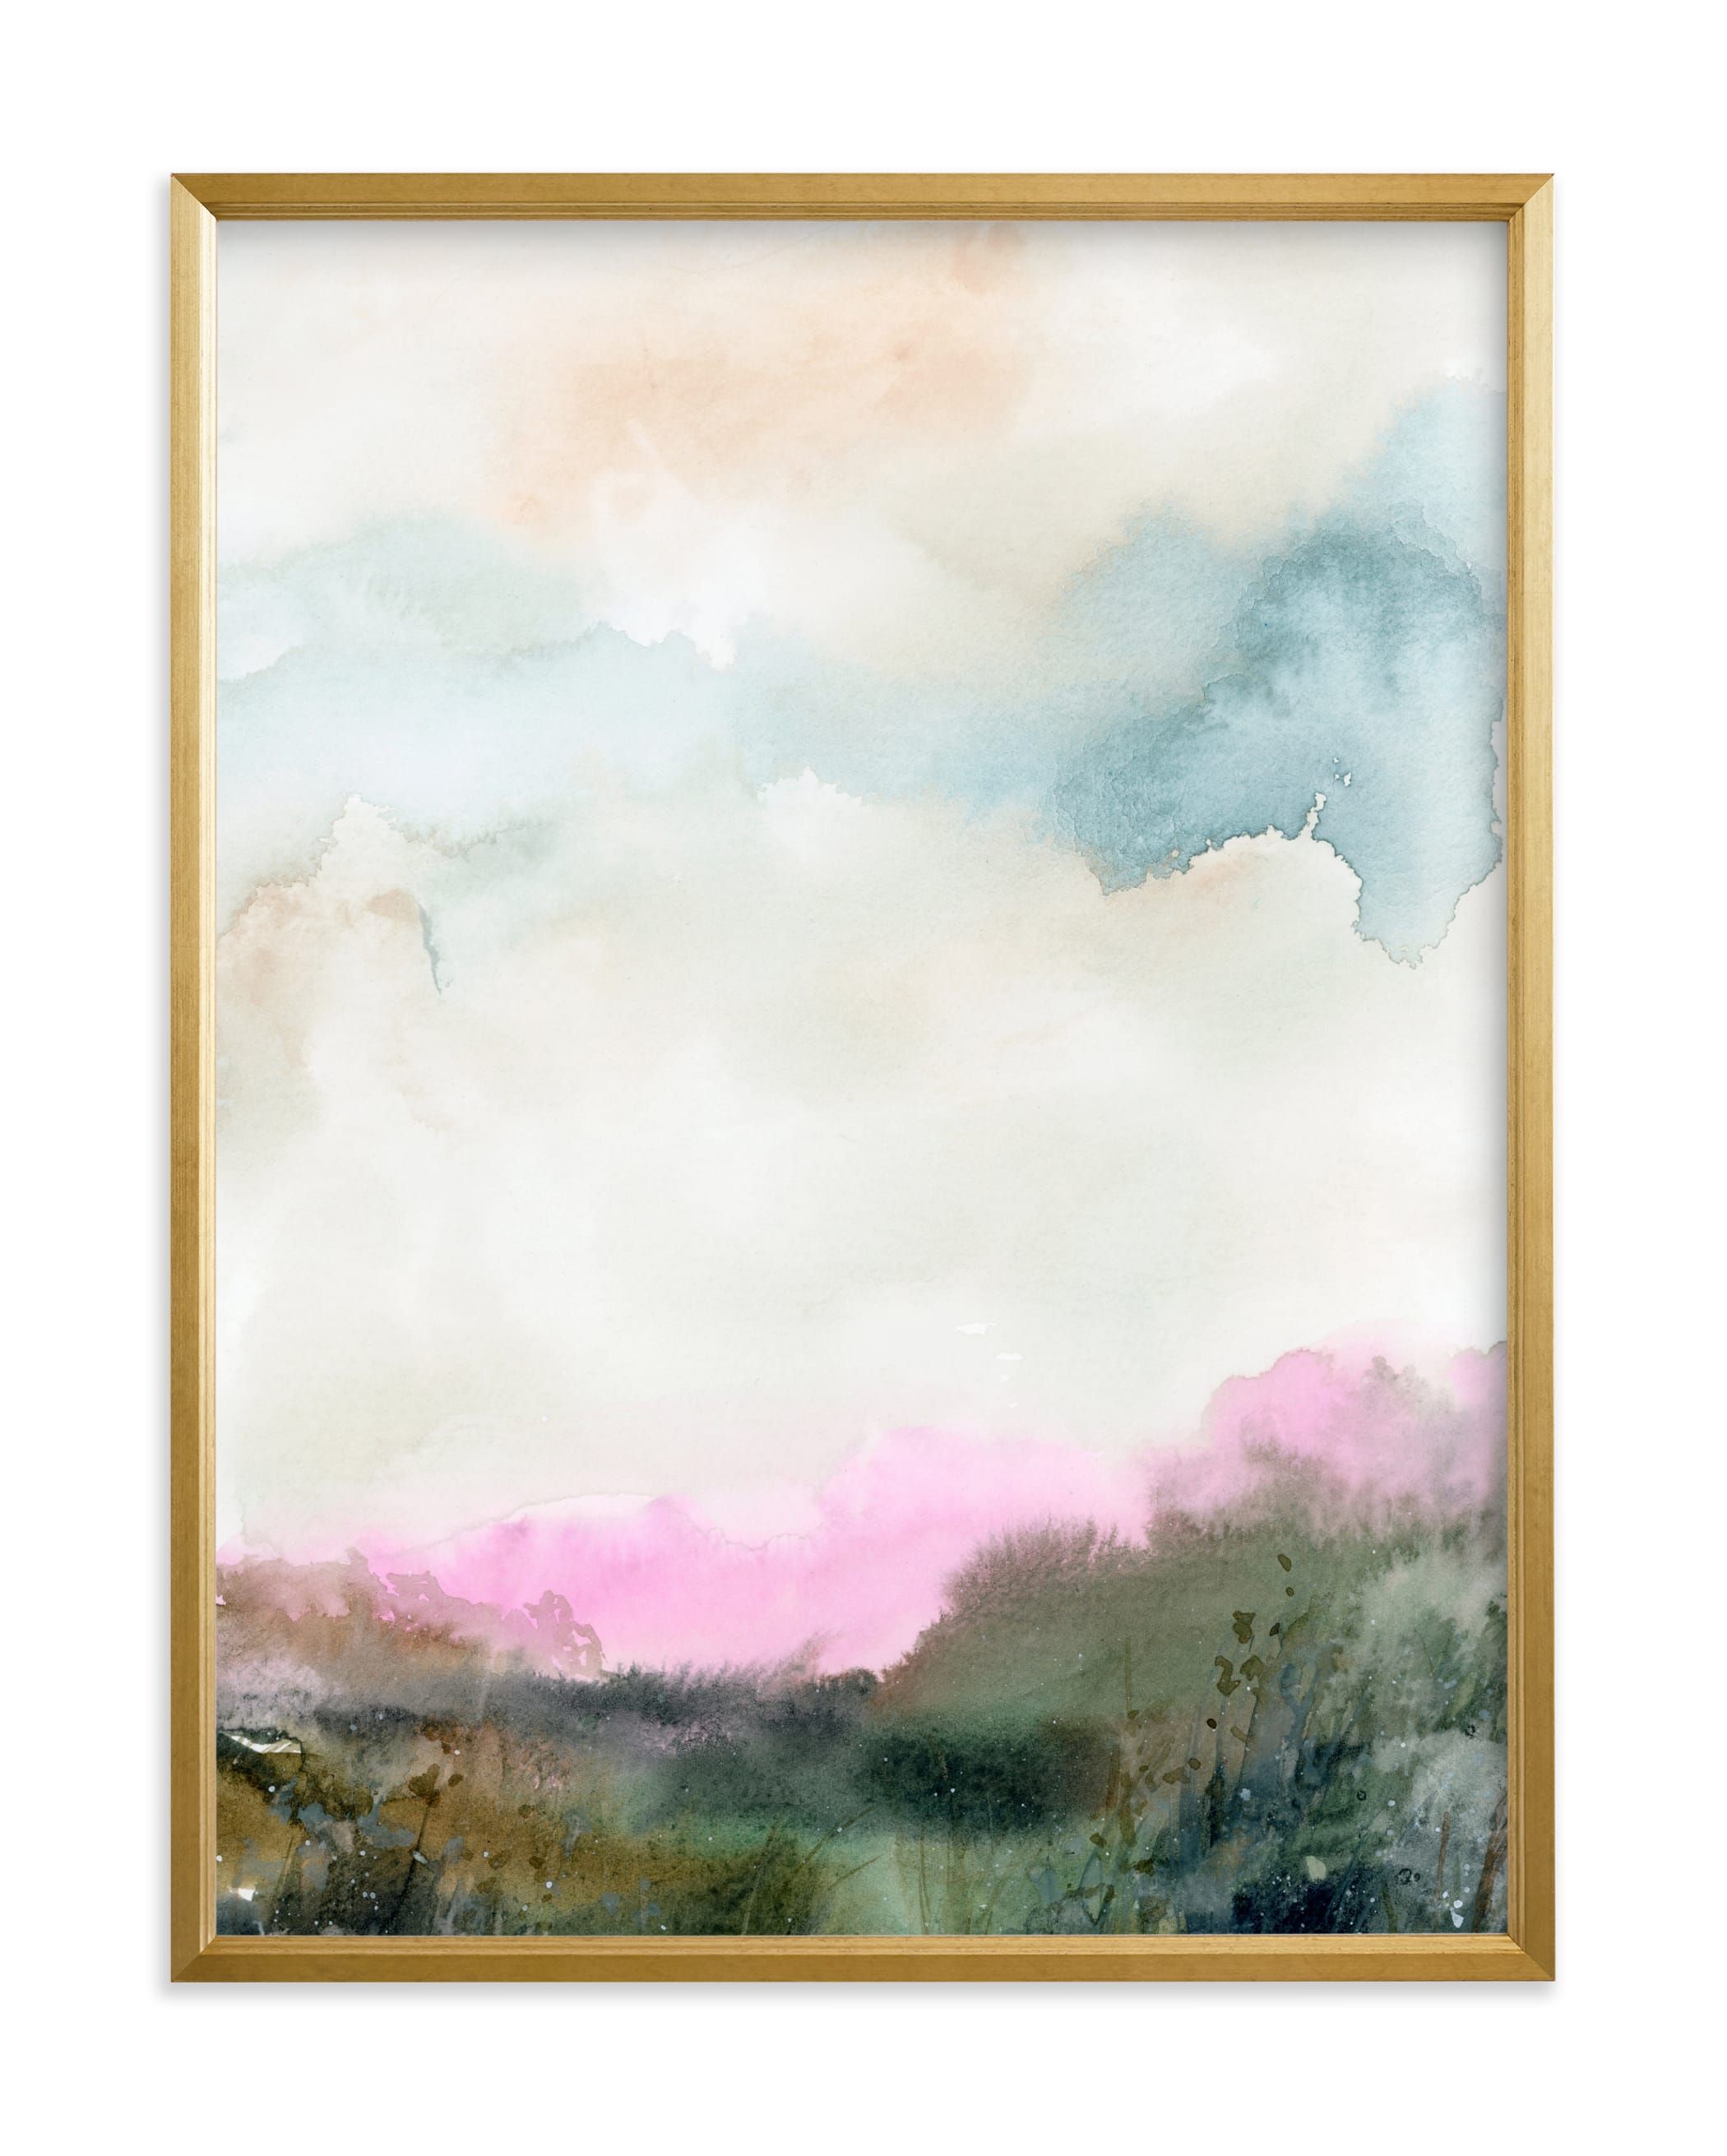 "At First Blush" - Marketplace Non-custom Art by Lindsay Megahed. | Minted